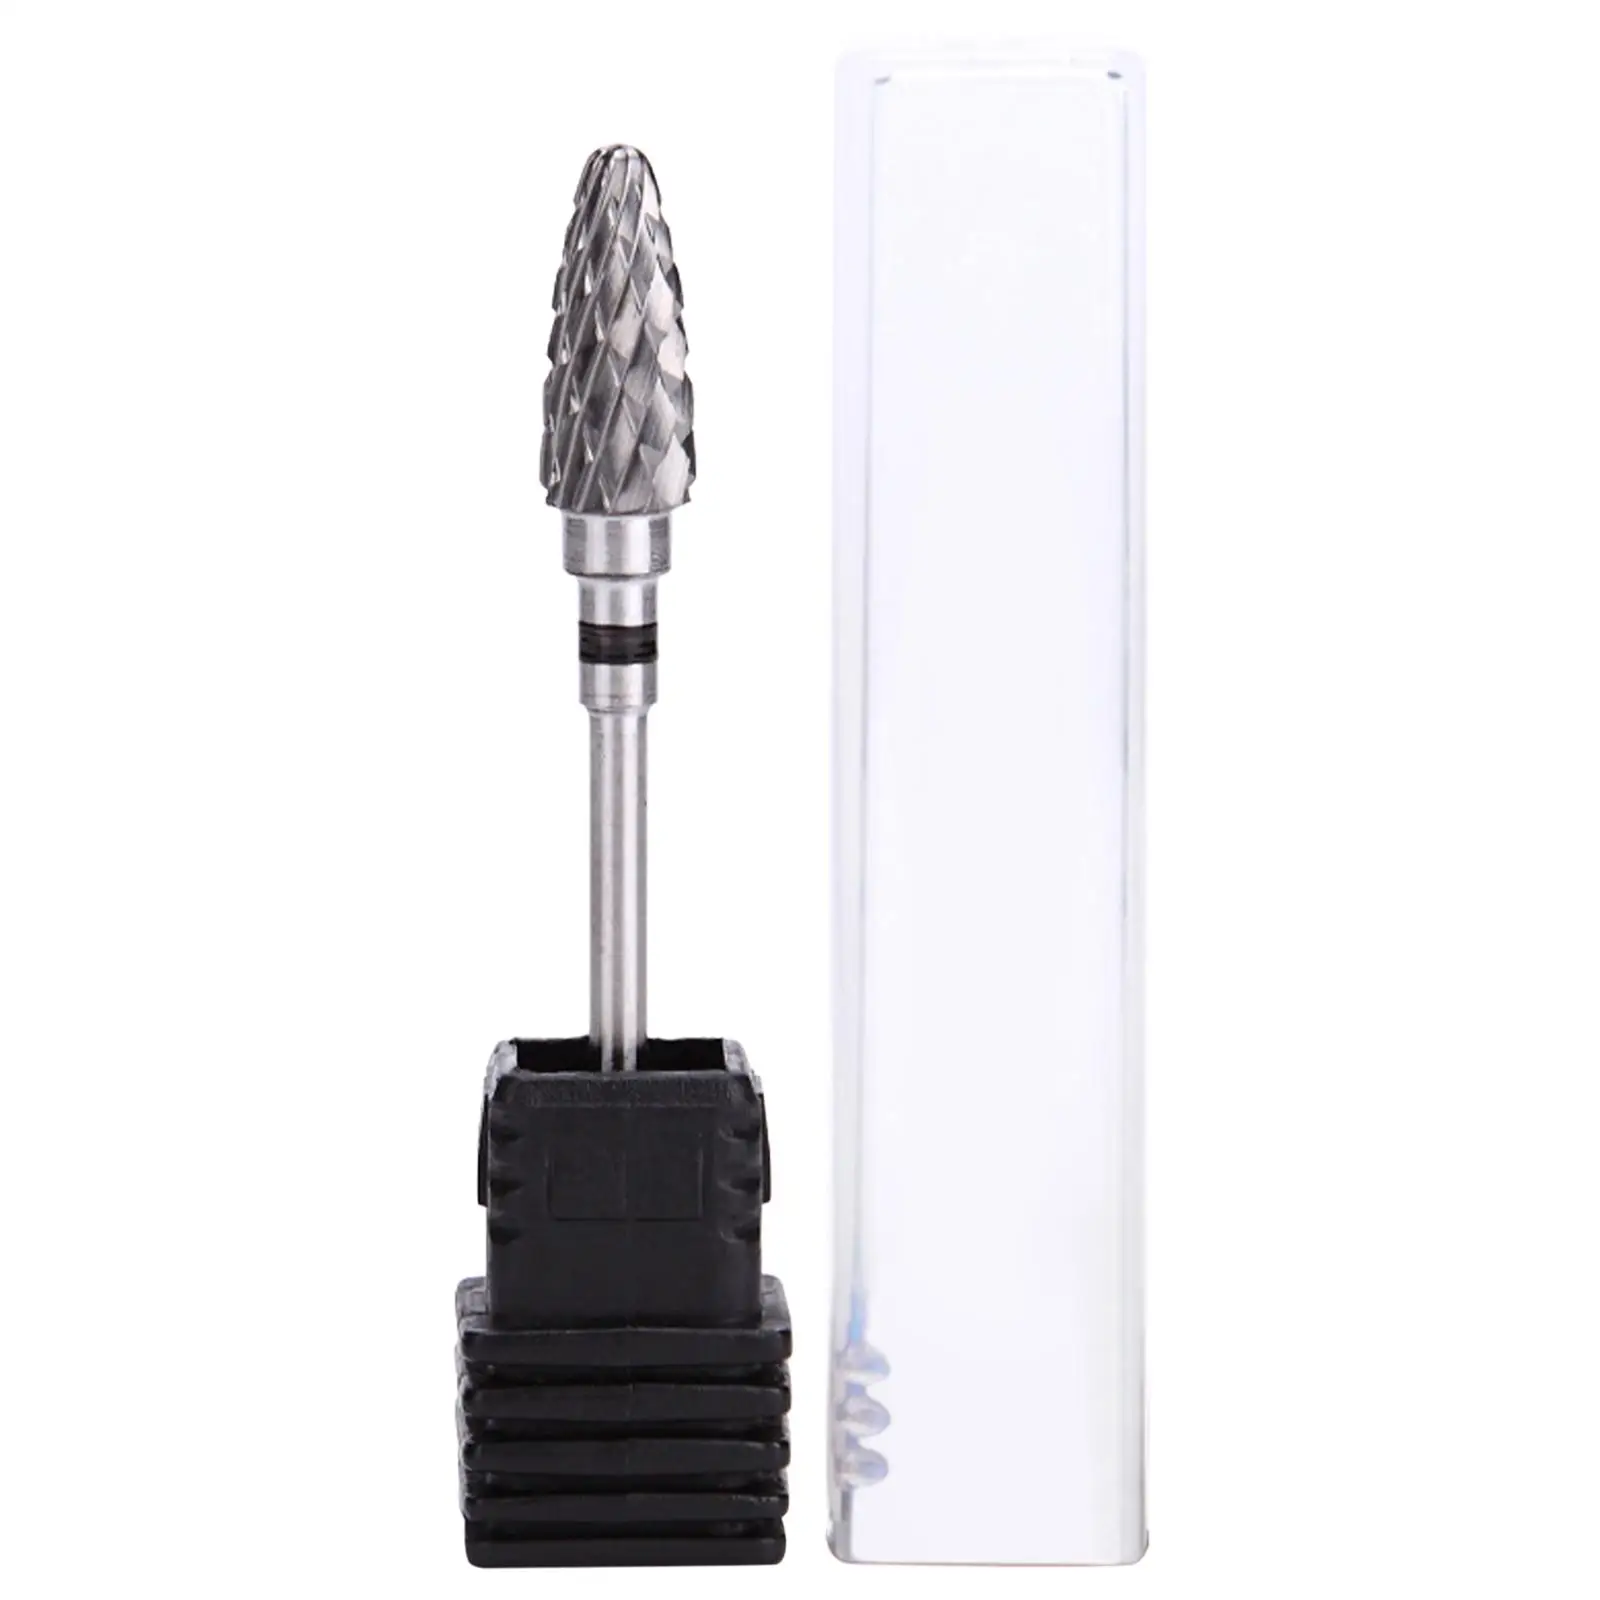 Nail Drill Bit Tungsten Steel for Processing Nails, Glass, Plastic Wide Application